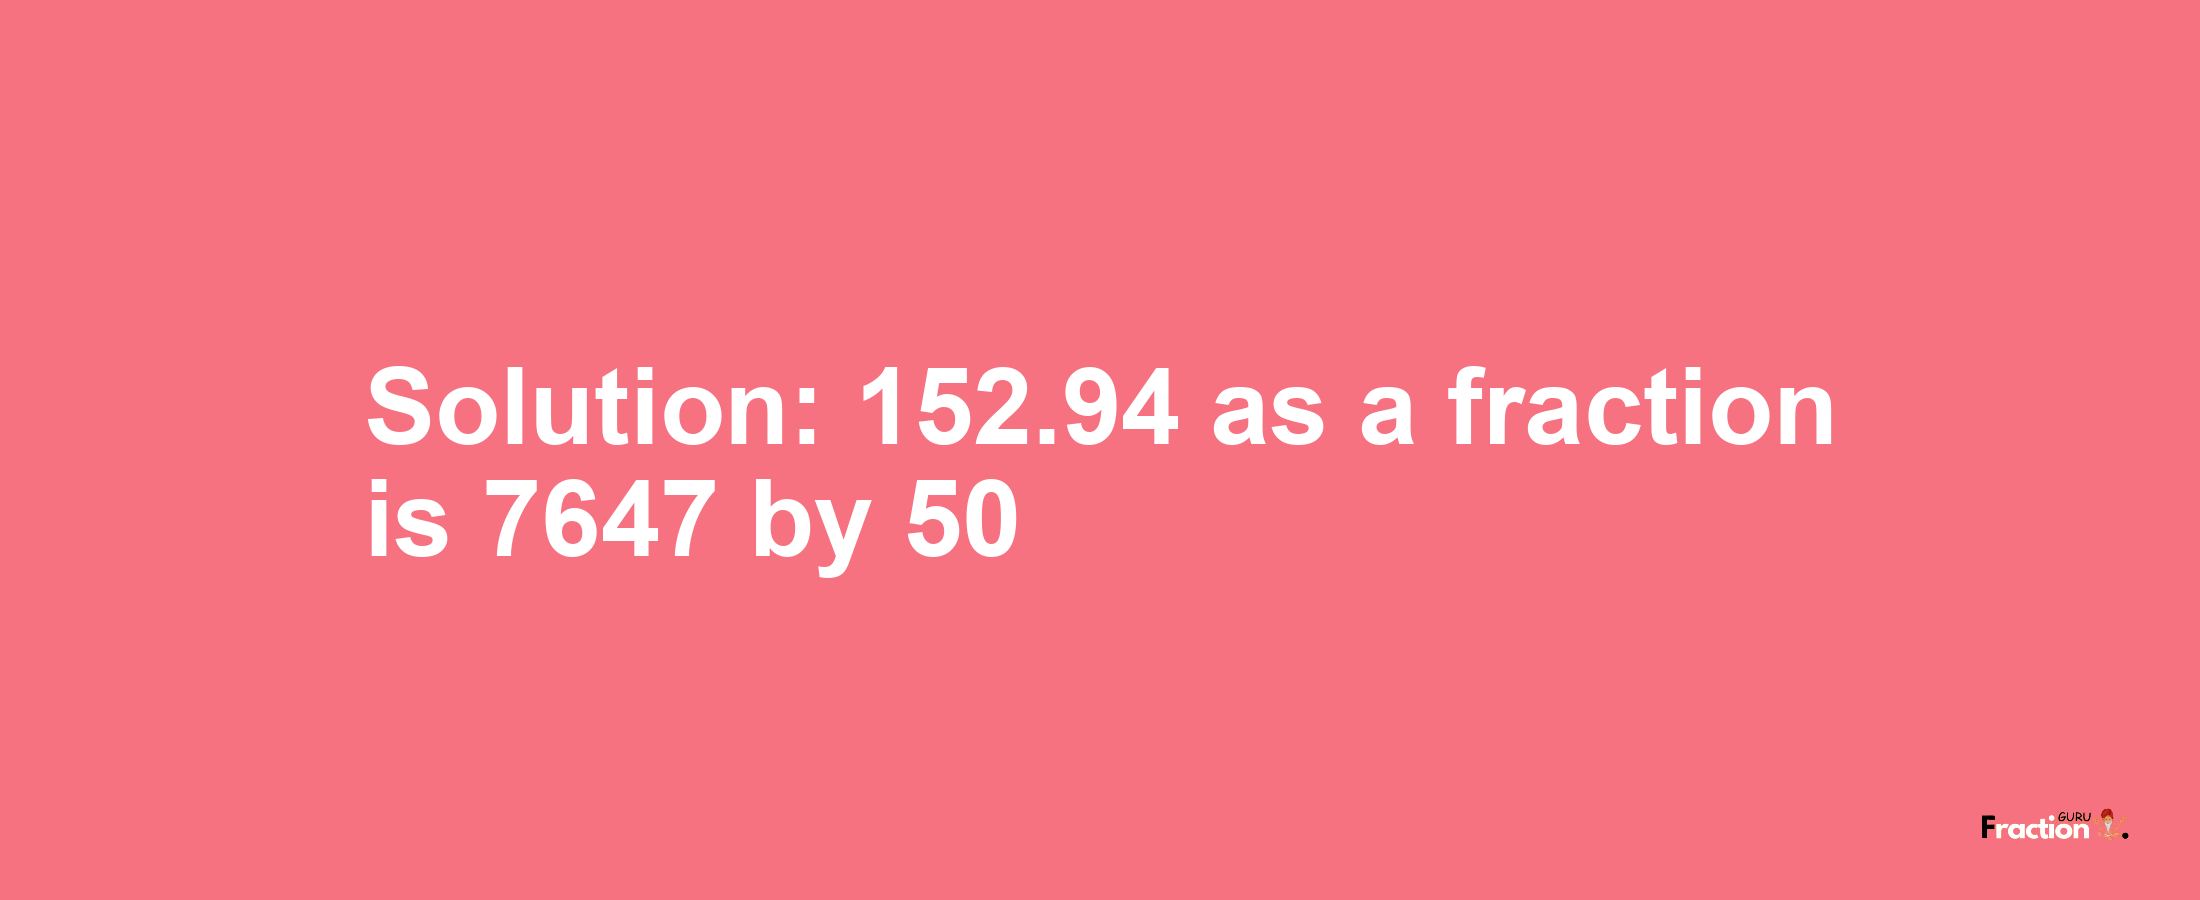 Solution:152.94 as a fraction is 7647/50